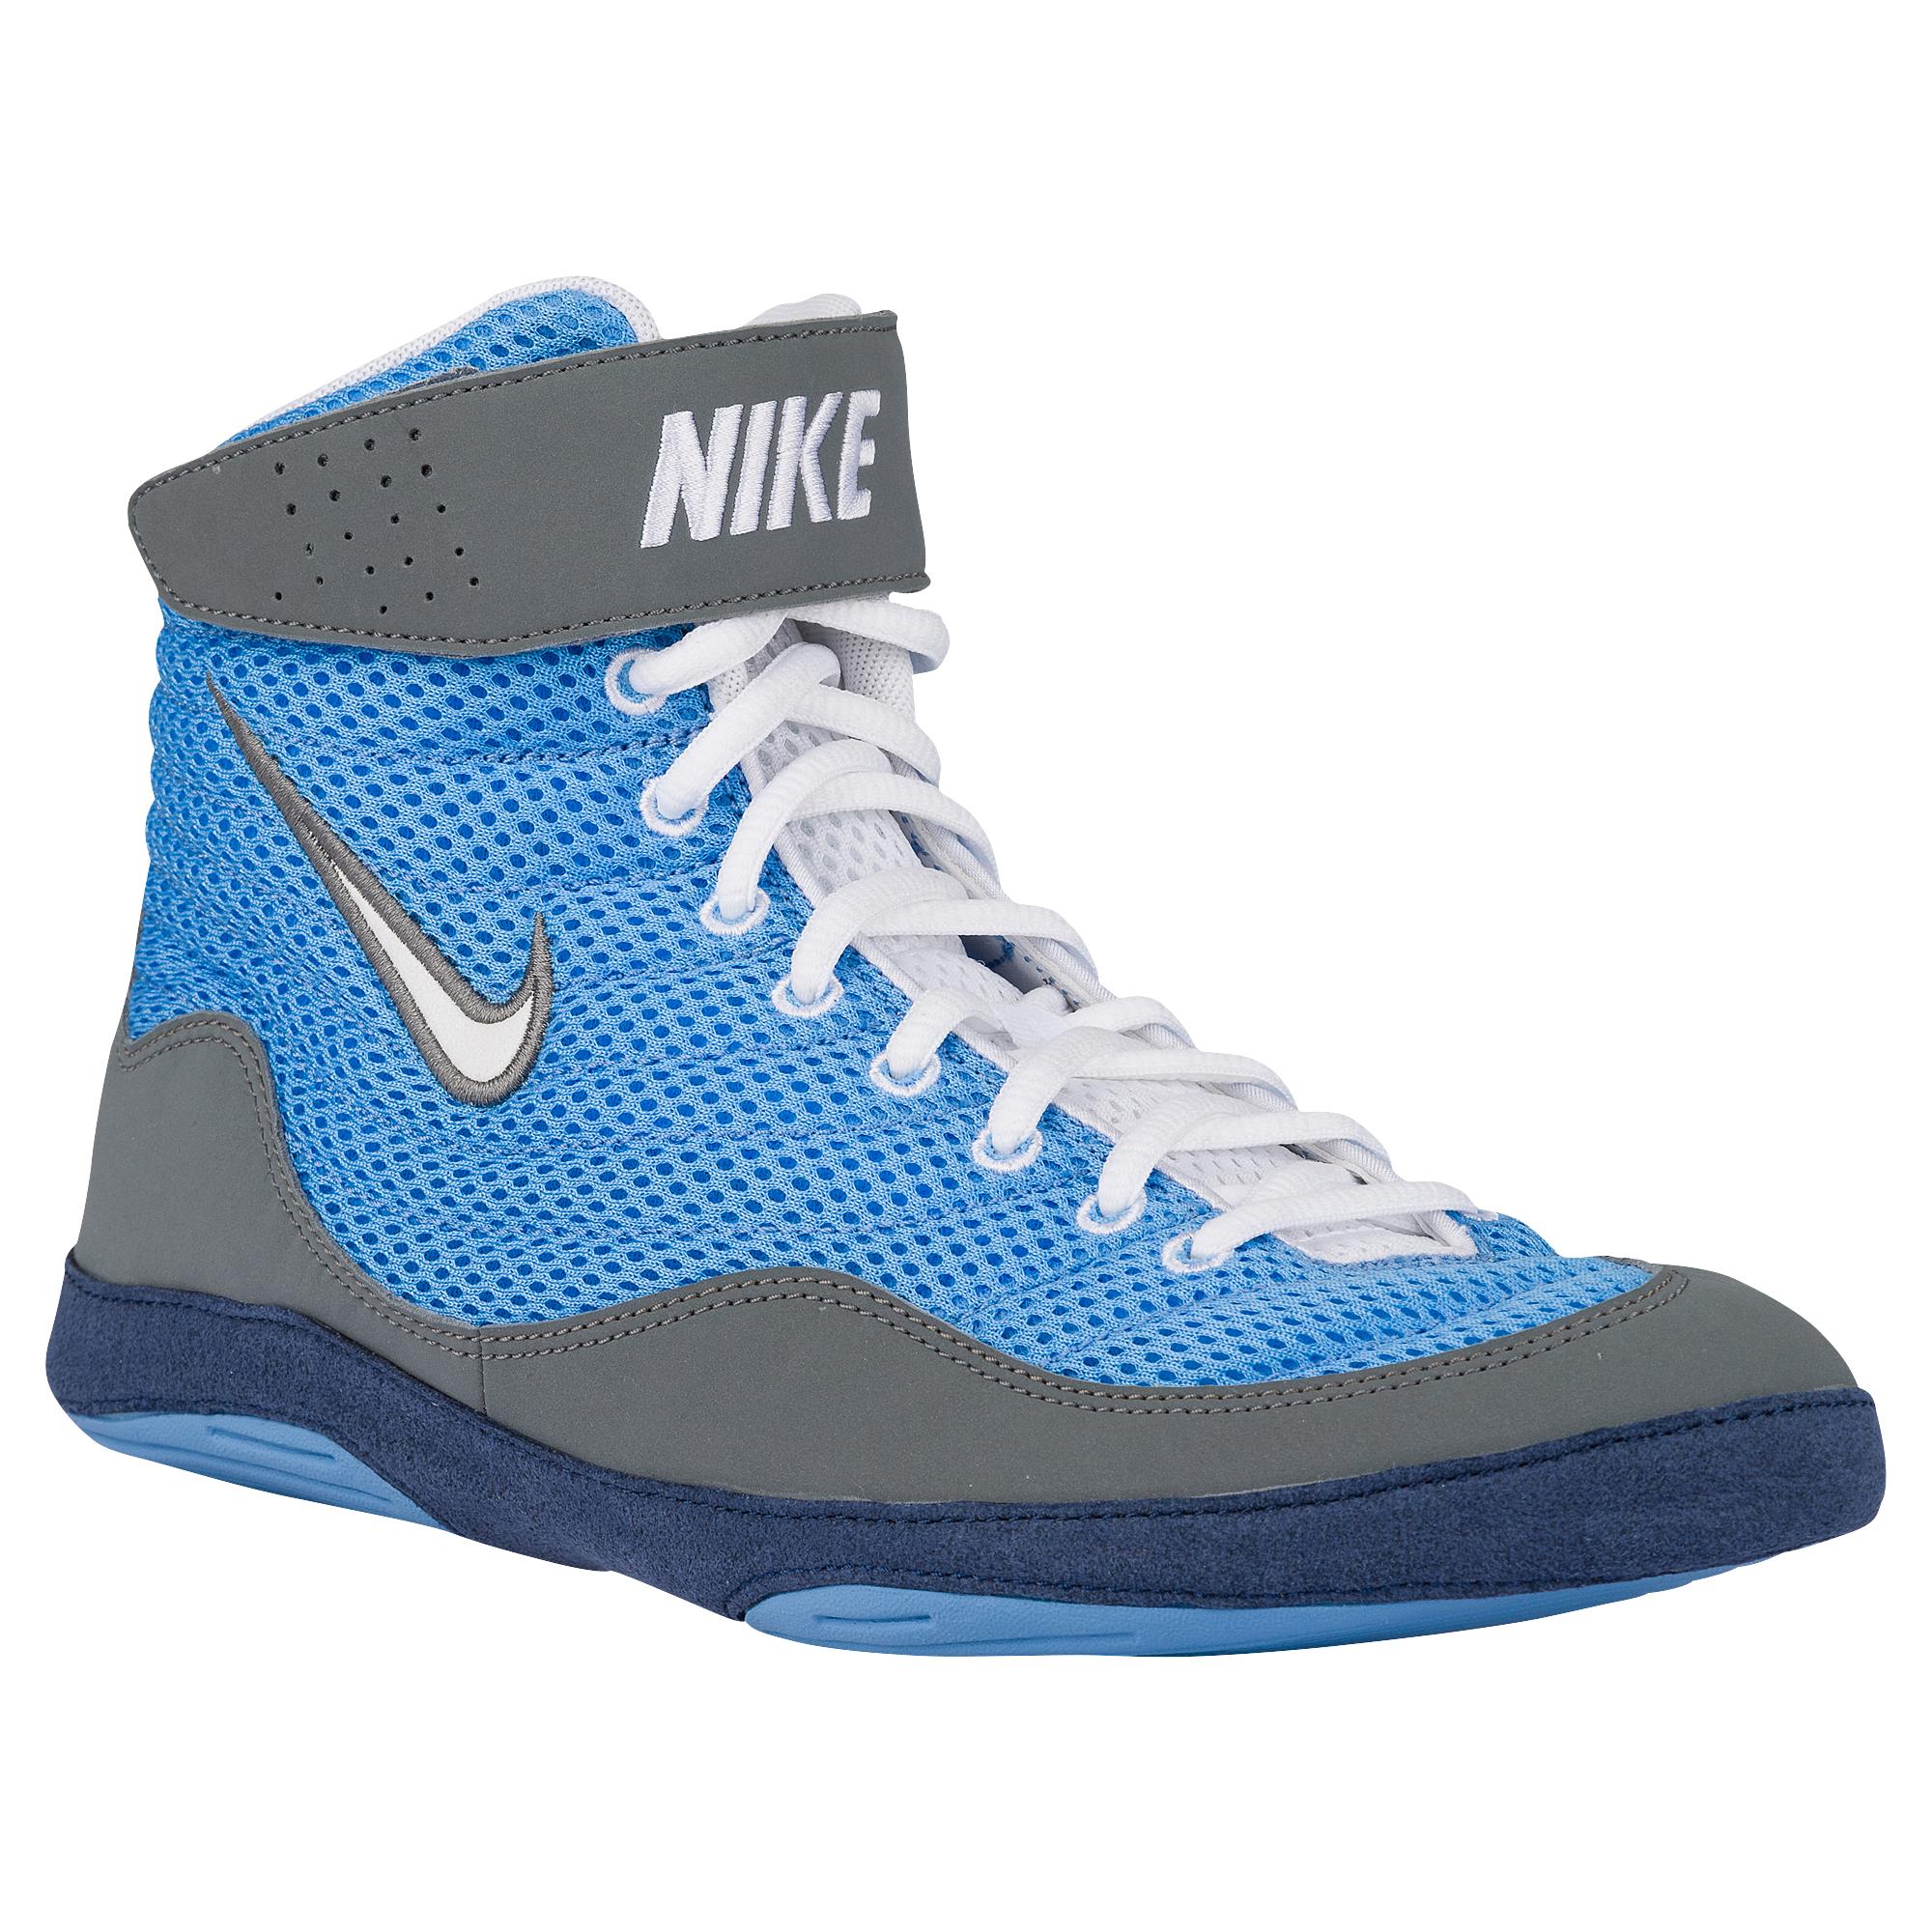 Nike Rubber Inflict 3 Full Sole Shoes 